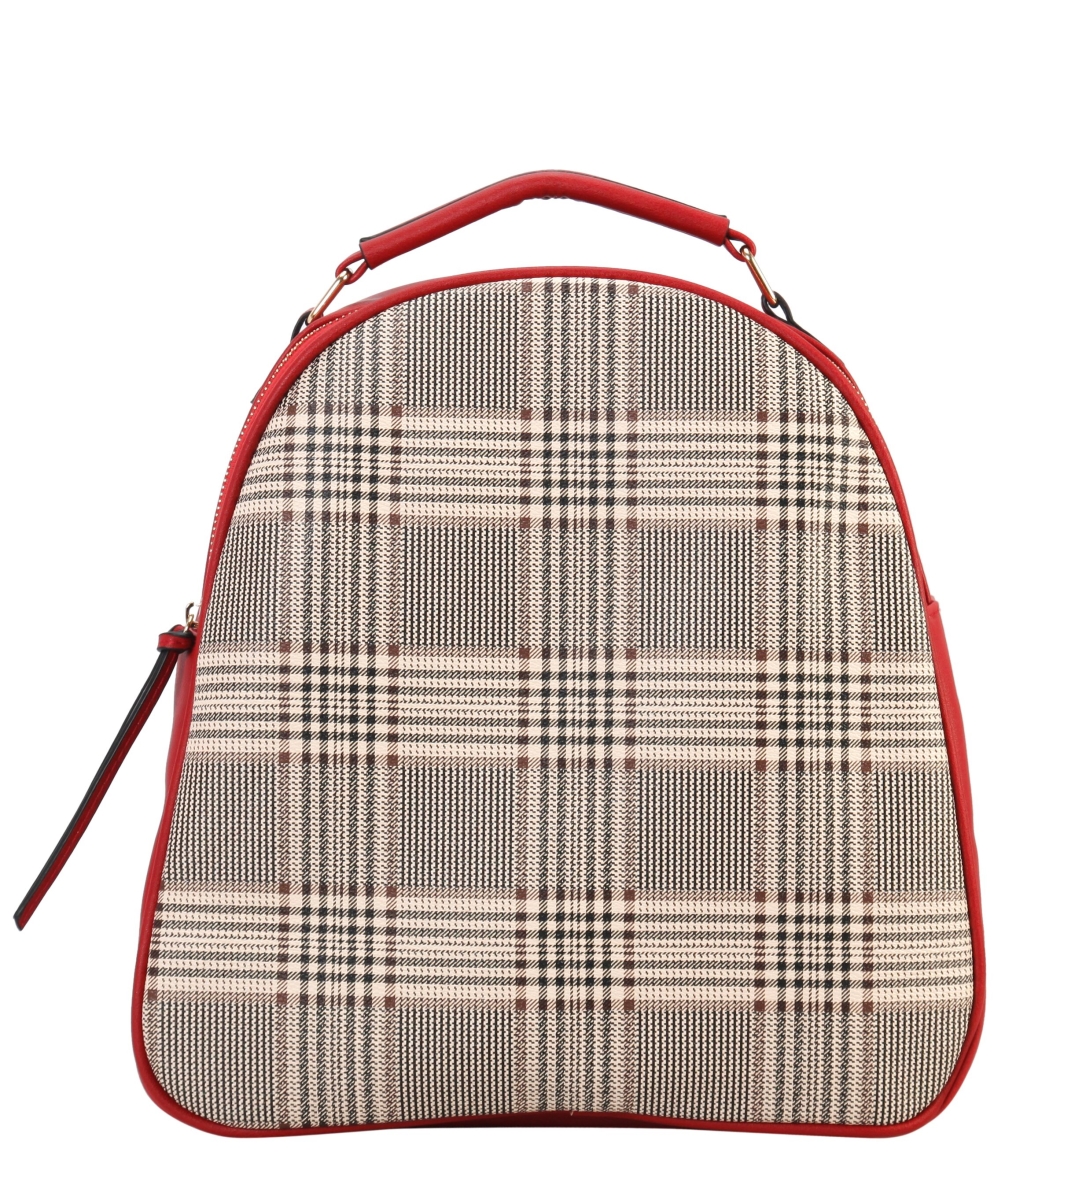 Agz-6692 Rd Two Tone Classical Plaid Pattern Backpack - Red